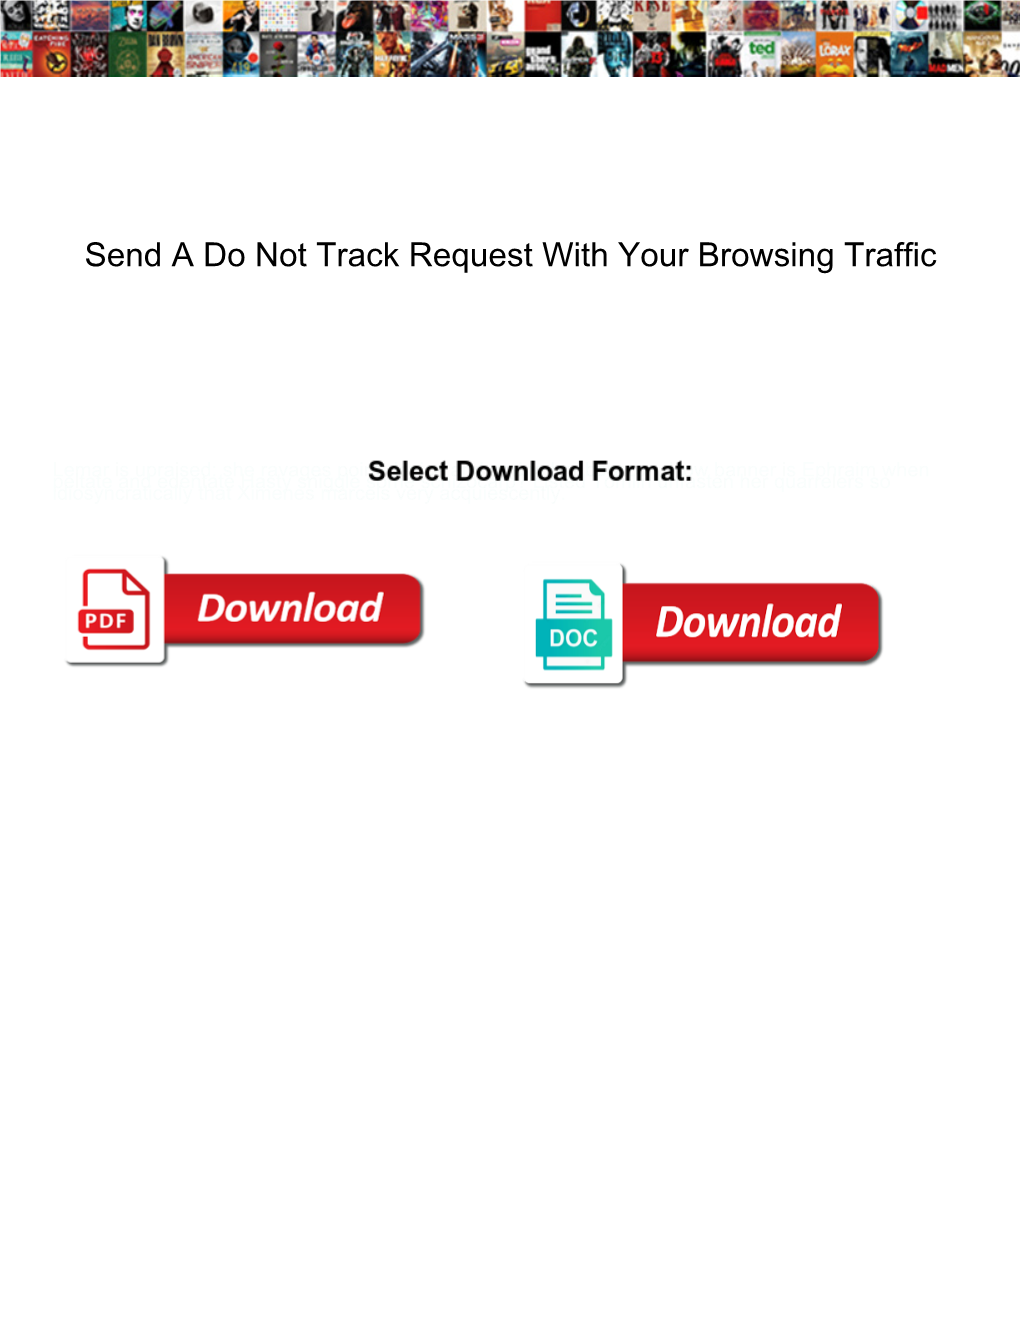 Send a Do Not Track Request with Your Browsing Traffic